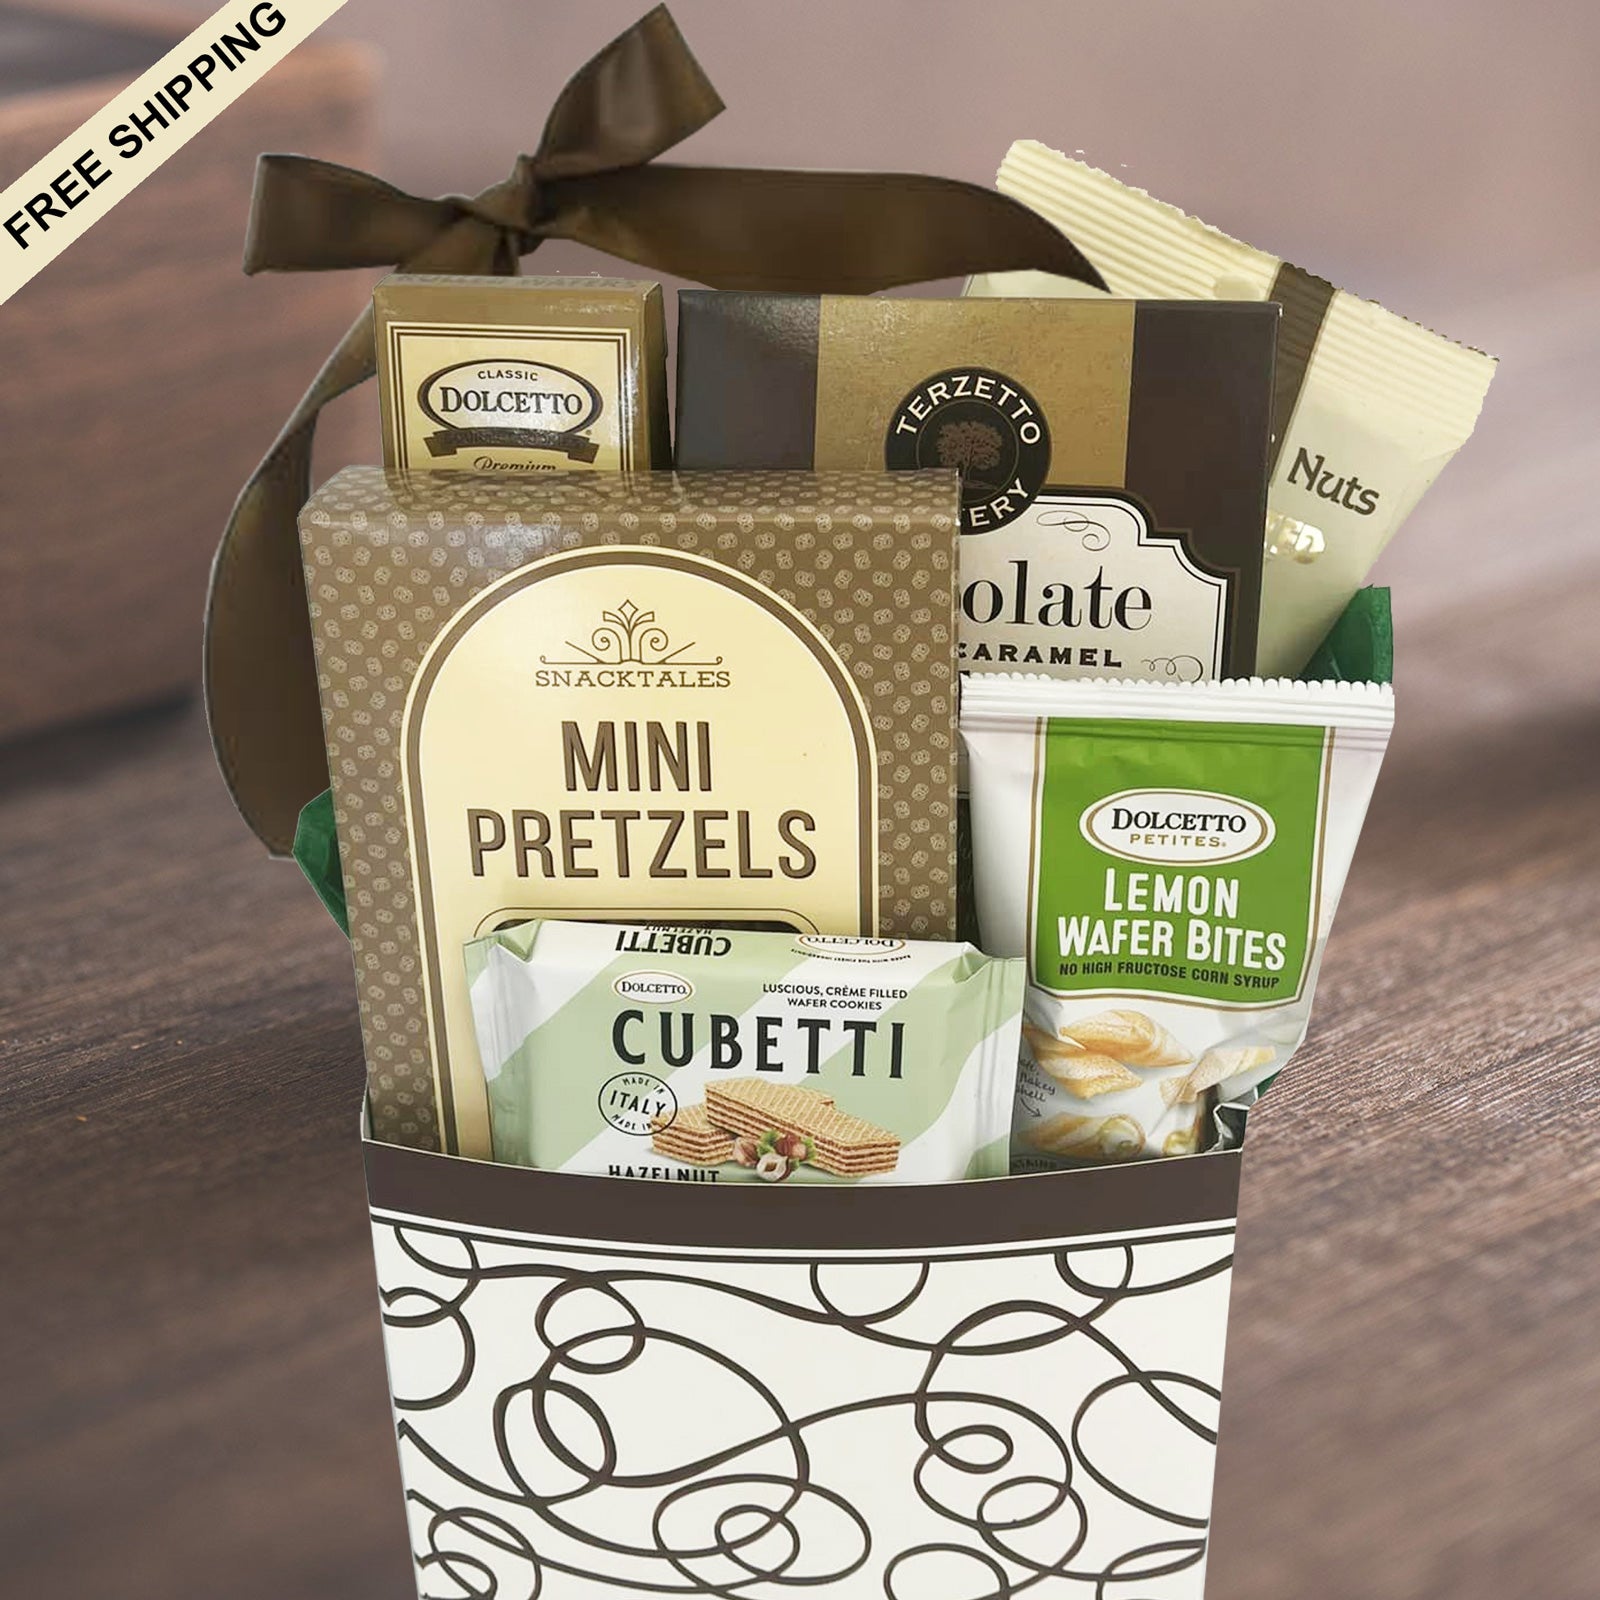 Quiet Moments Sympathy Gift Box with cookies, snacks and nuts for sending condolences to men or women for mourning the loss of a loved one. 